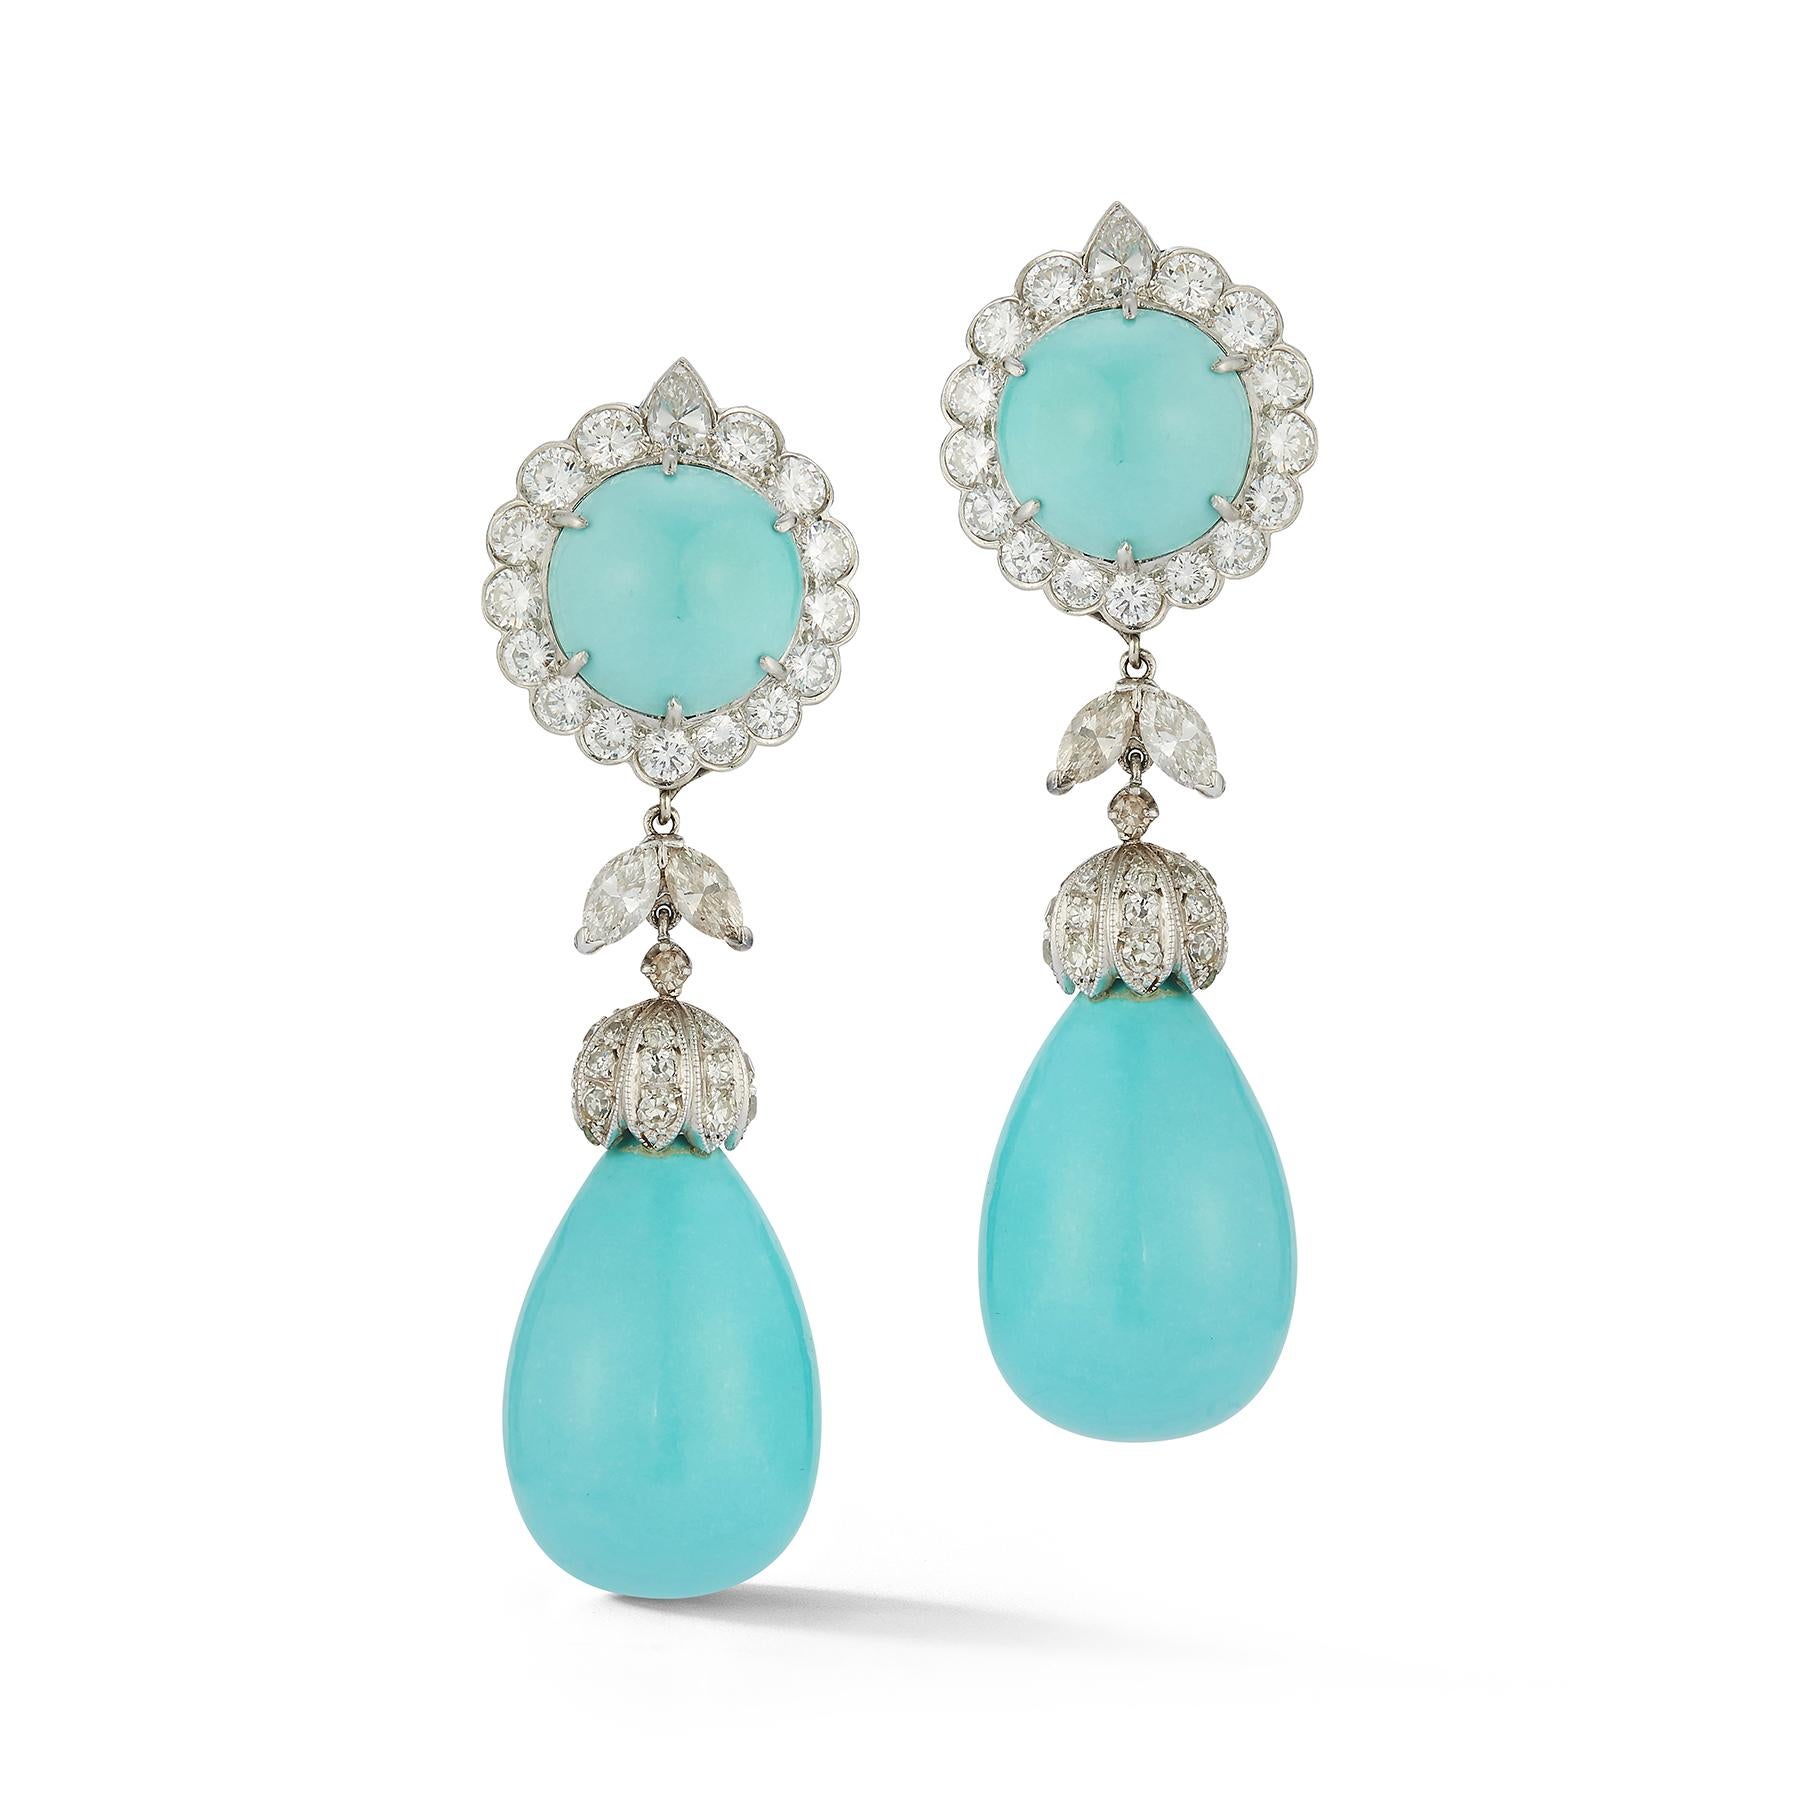 Iconic Van Cleef & Arpels Turquoise & Diamond 'Day and Night' Earrings

This iconic design features a captivating turquoise set in an array of round and marquise cut diamonds.

The pendants are detachable

Signed VAN CLEEF & ARPELS NY. 39273